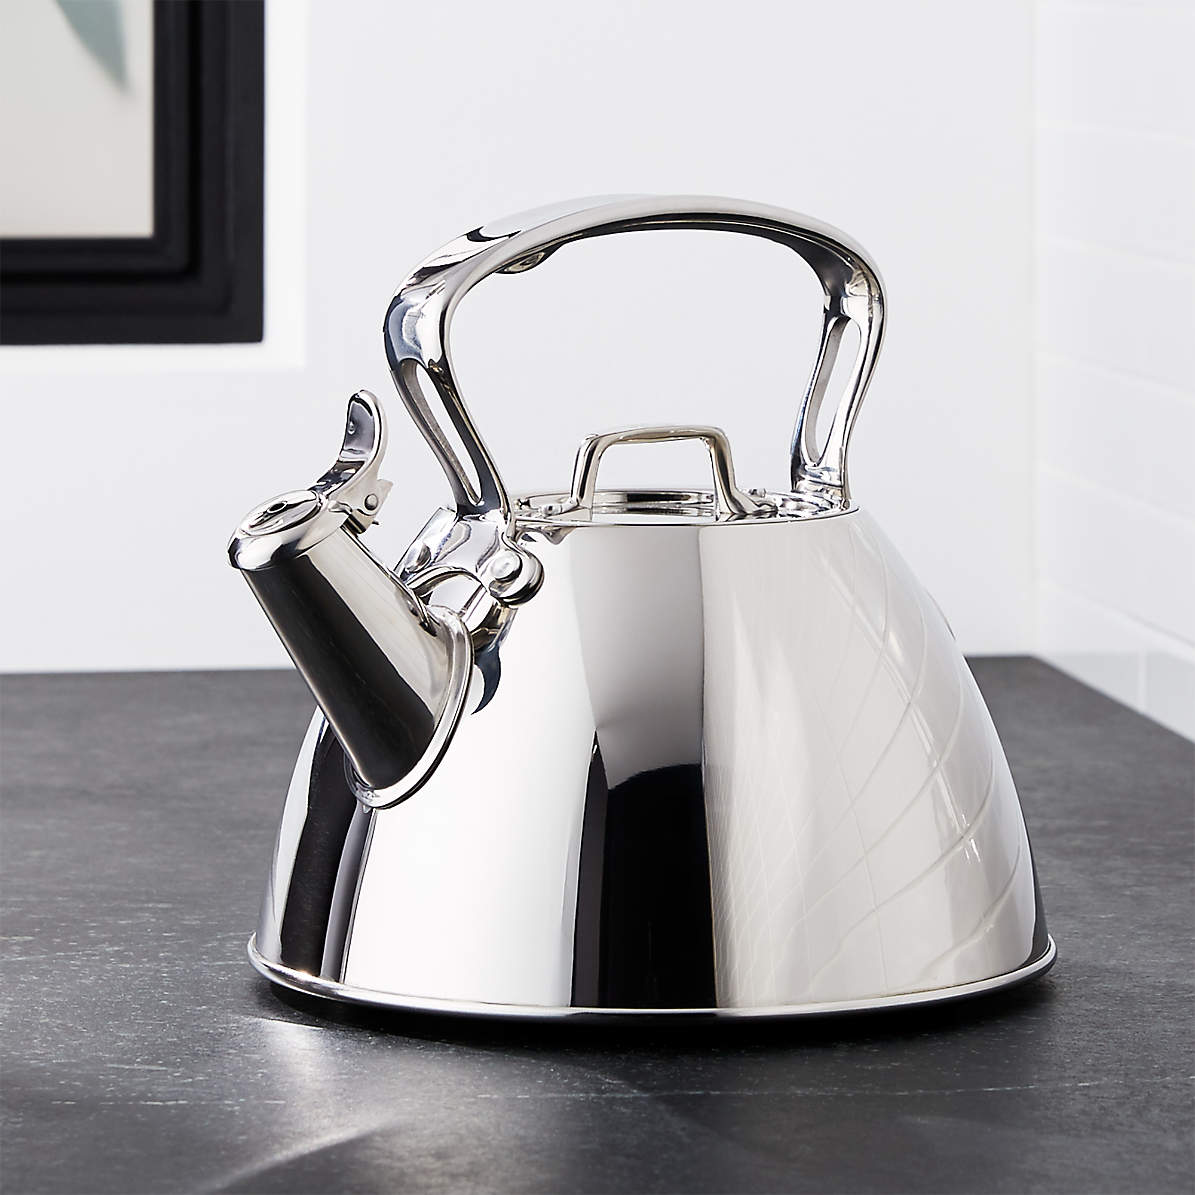 All-Clad All-Clad Stainless Steel Tea Kettle Open handle 